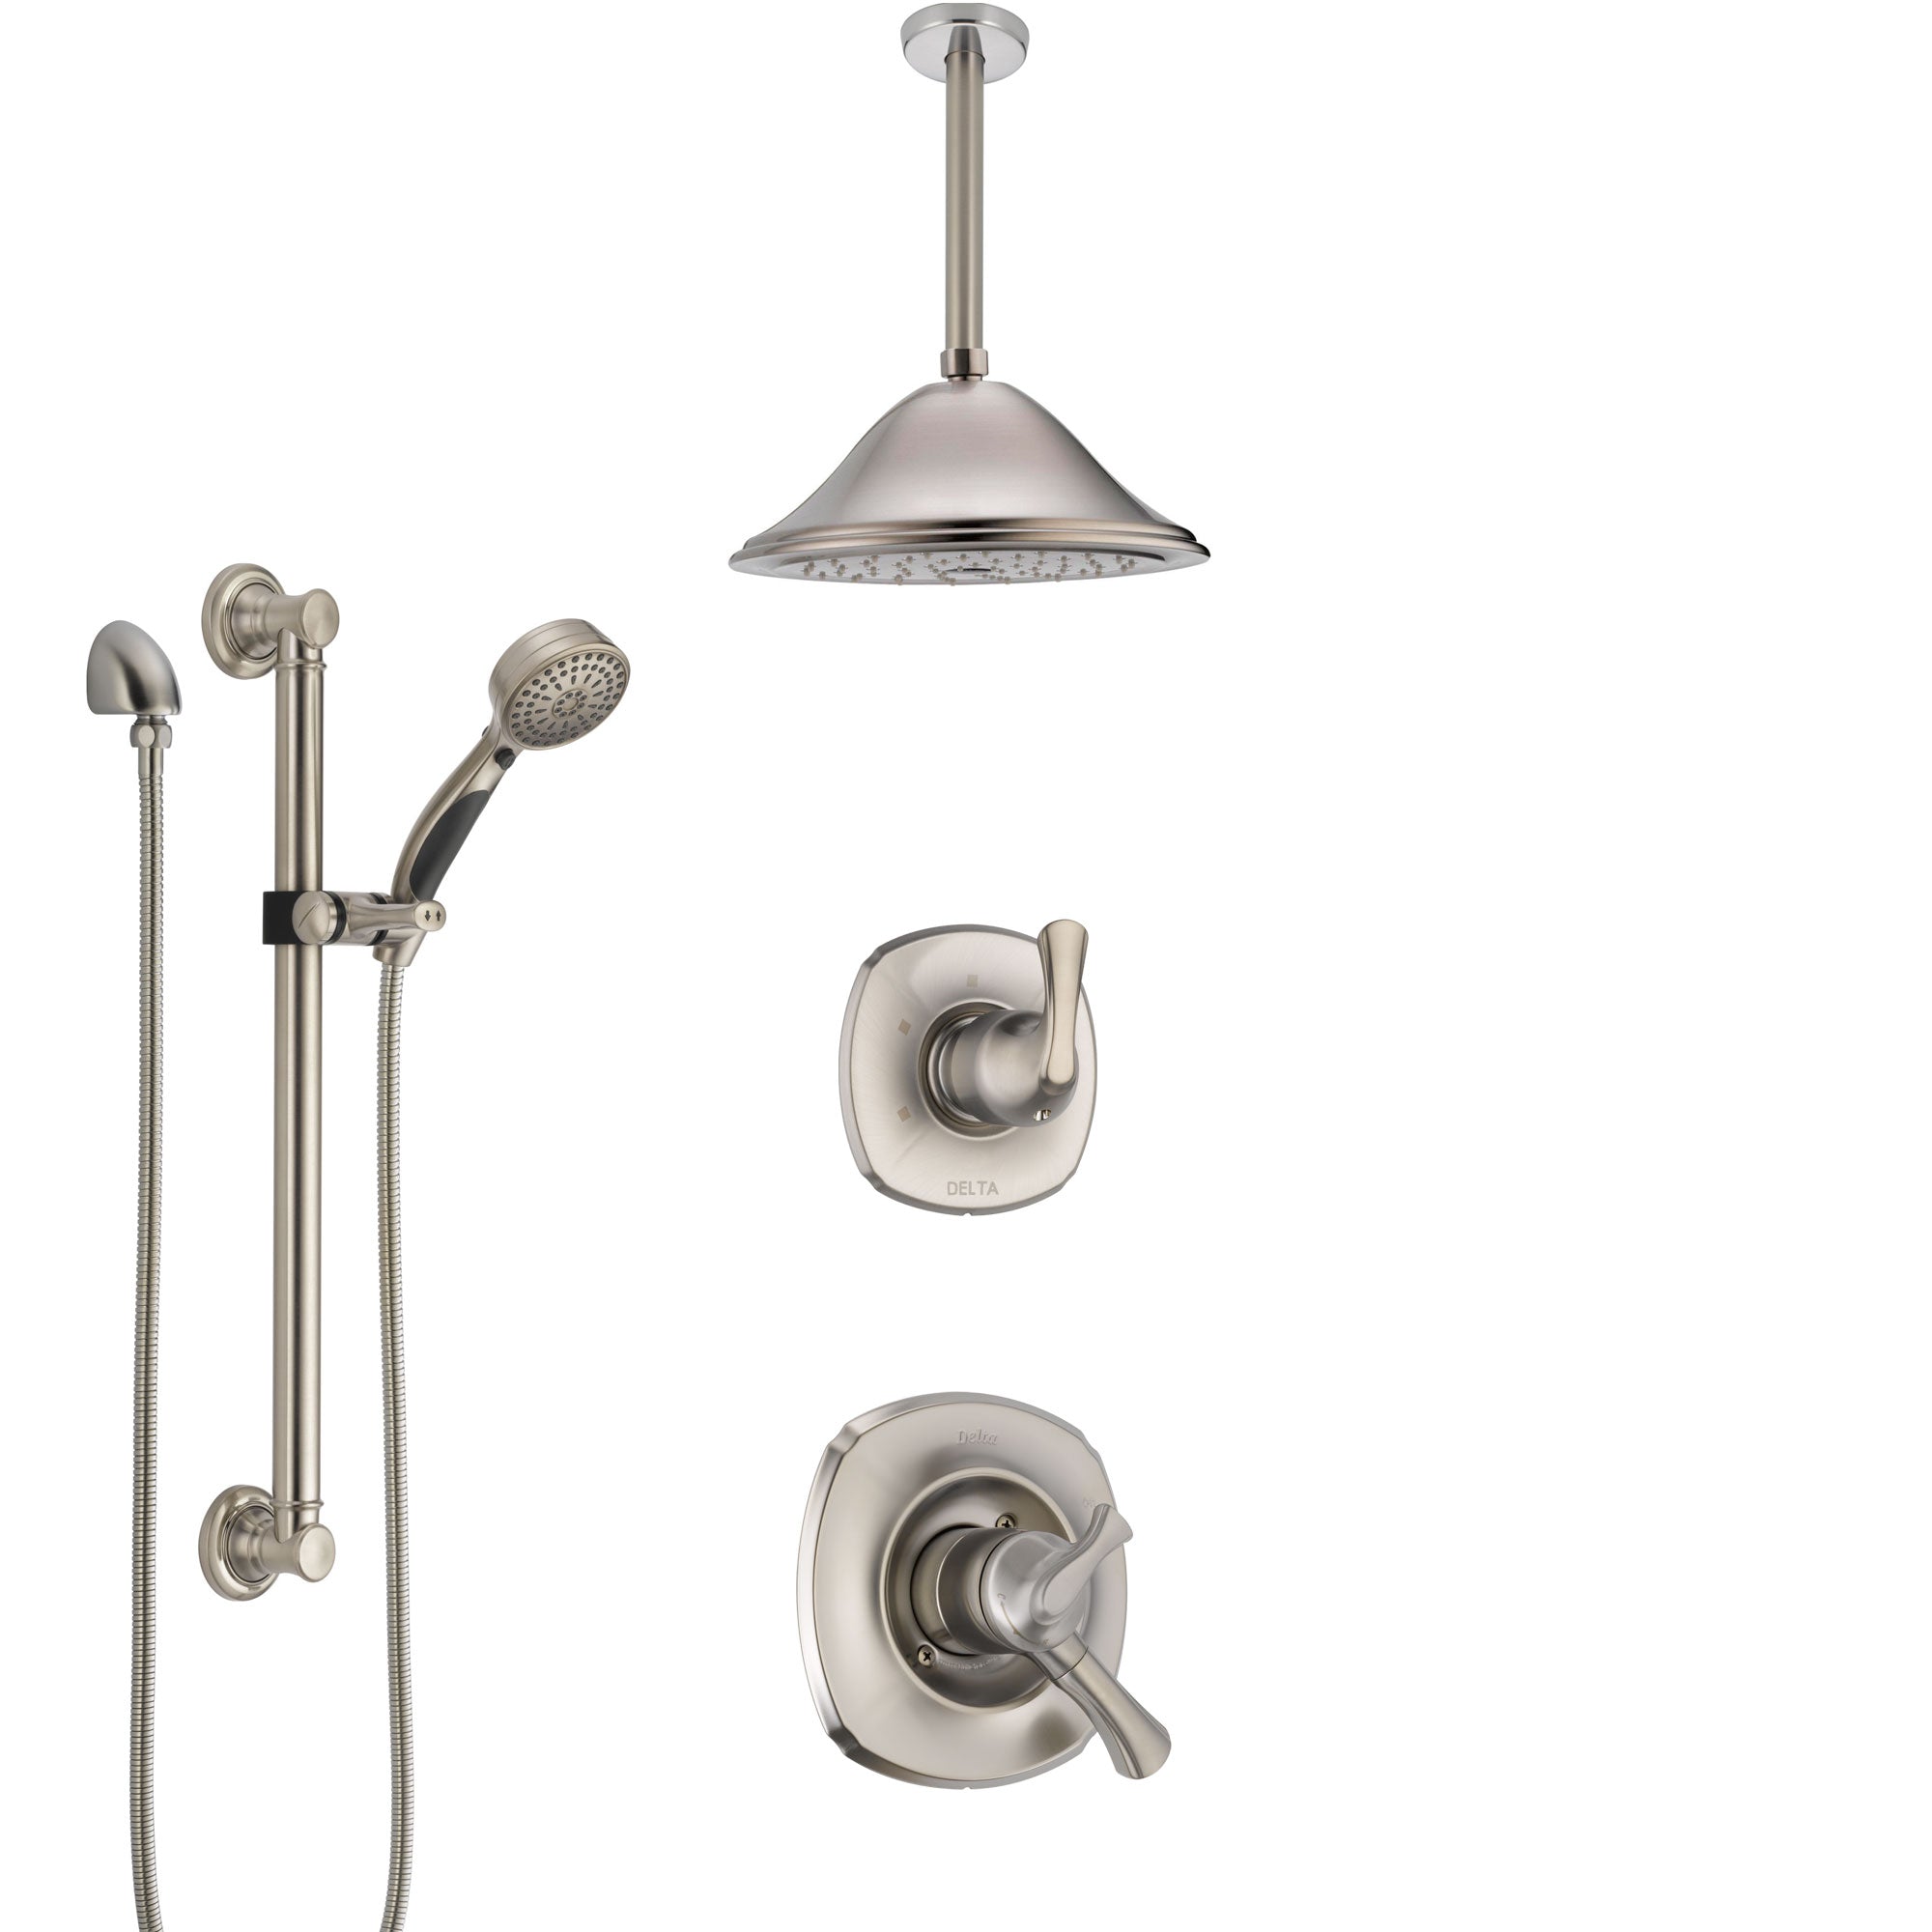 Delta Addison Dual Control Handle Stainless Steel Finish Shower System, Diverter, Ceiling Mount Showerhead, and Hand Shower with Grab Bar SS1792SS8